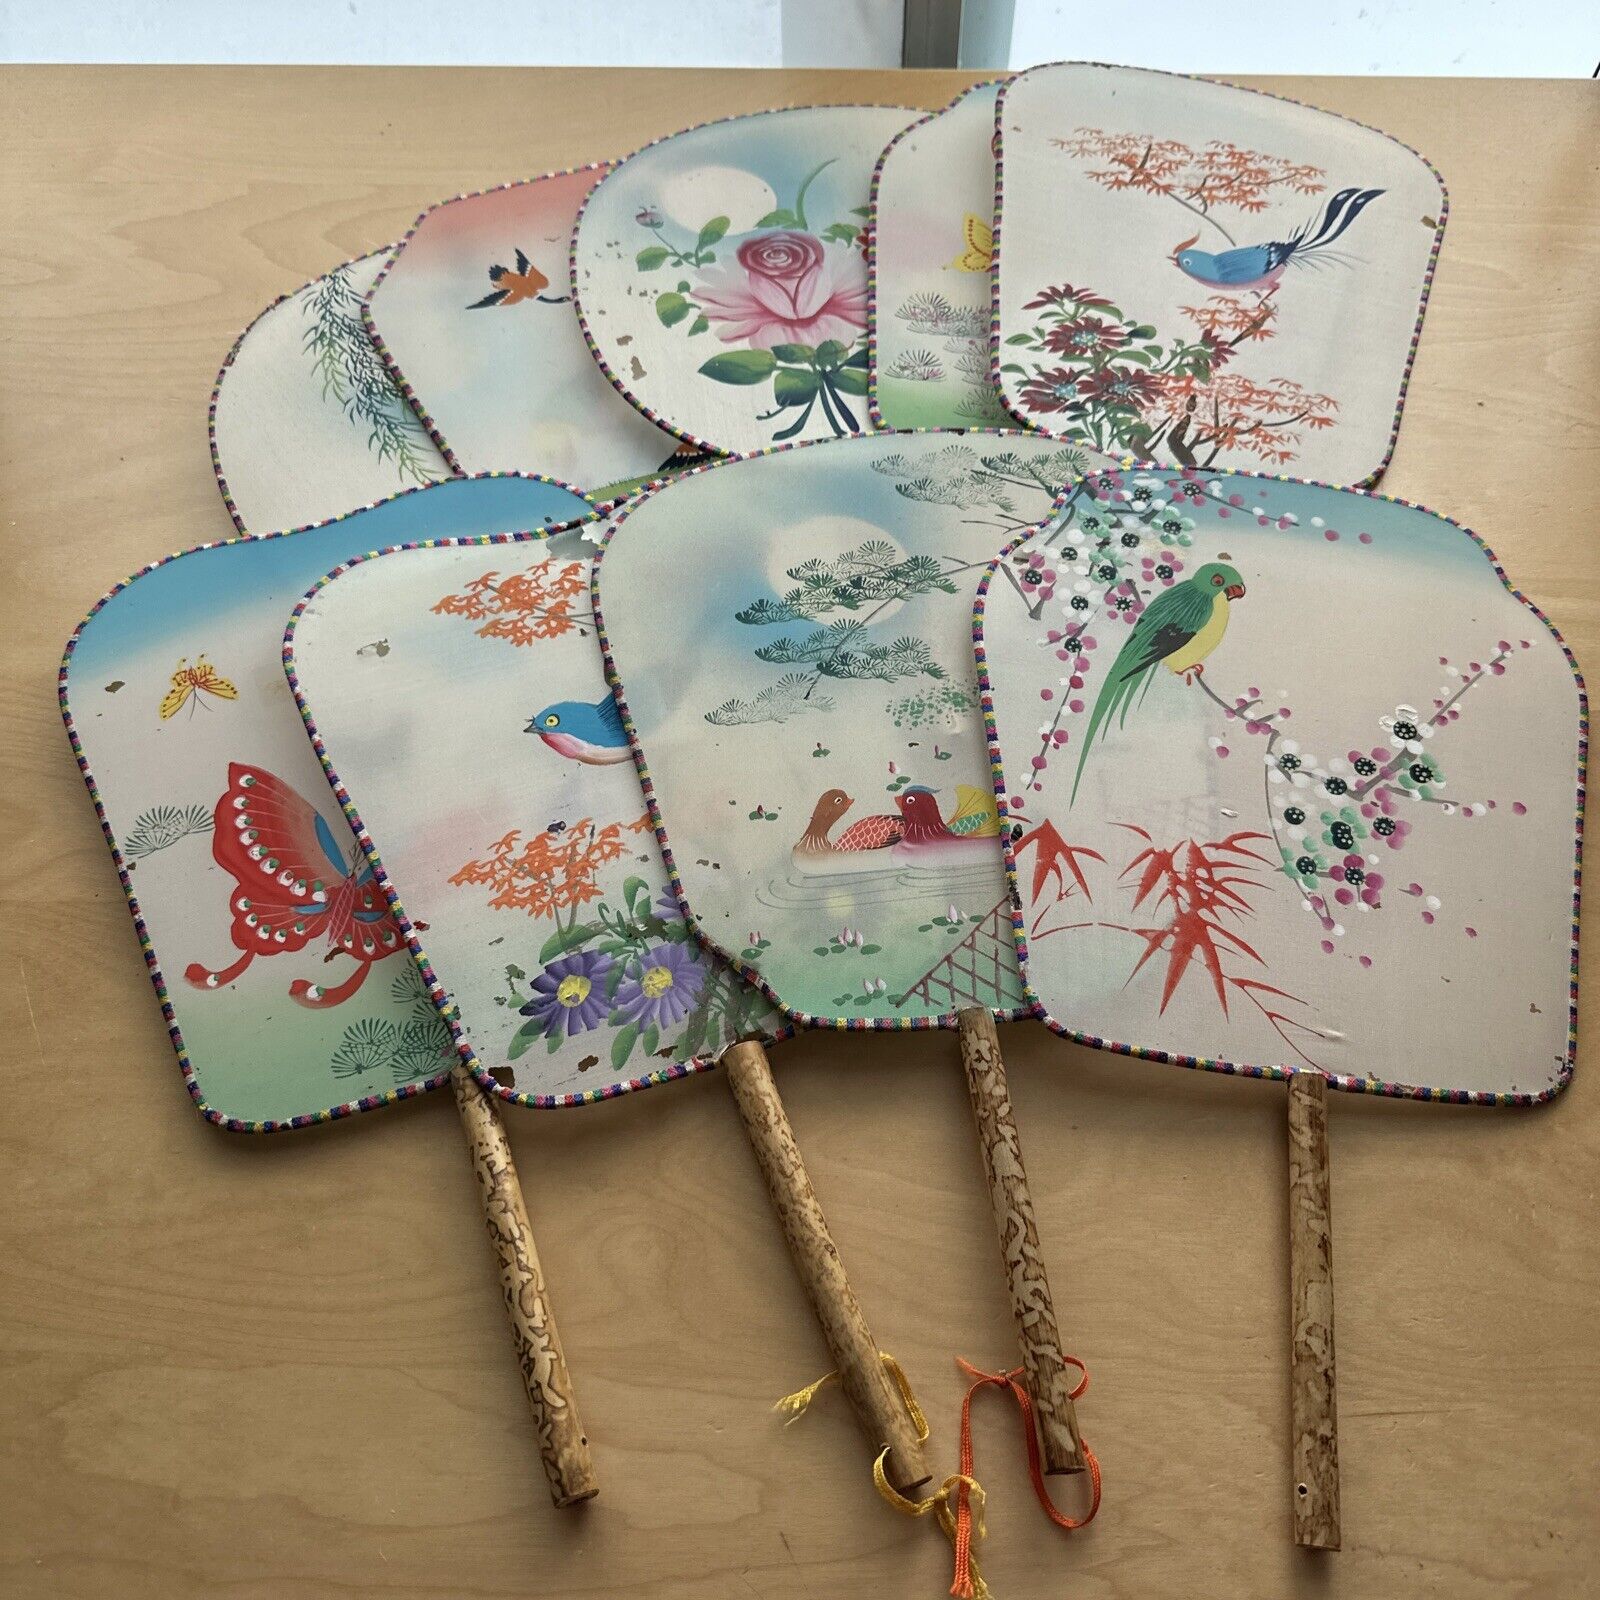 LOT (9) Vtg Hand-Painted Chinese Silk Bamboo Paddle Fans Birds Butterfly Florals